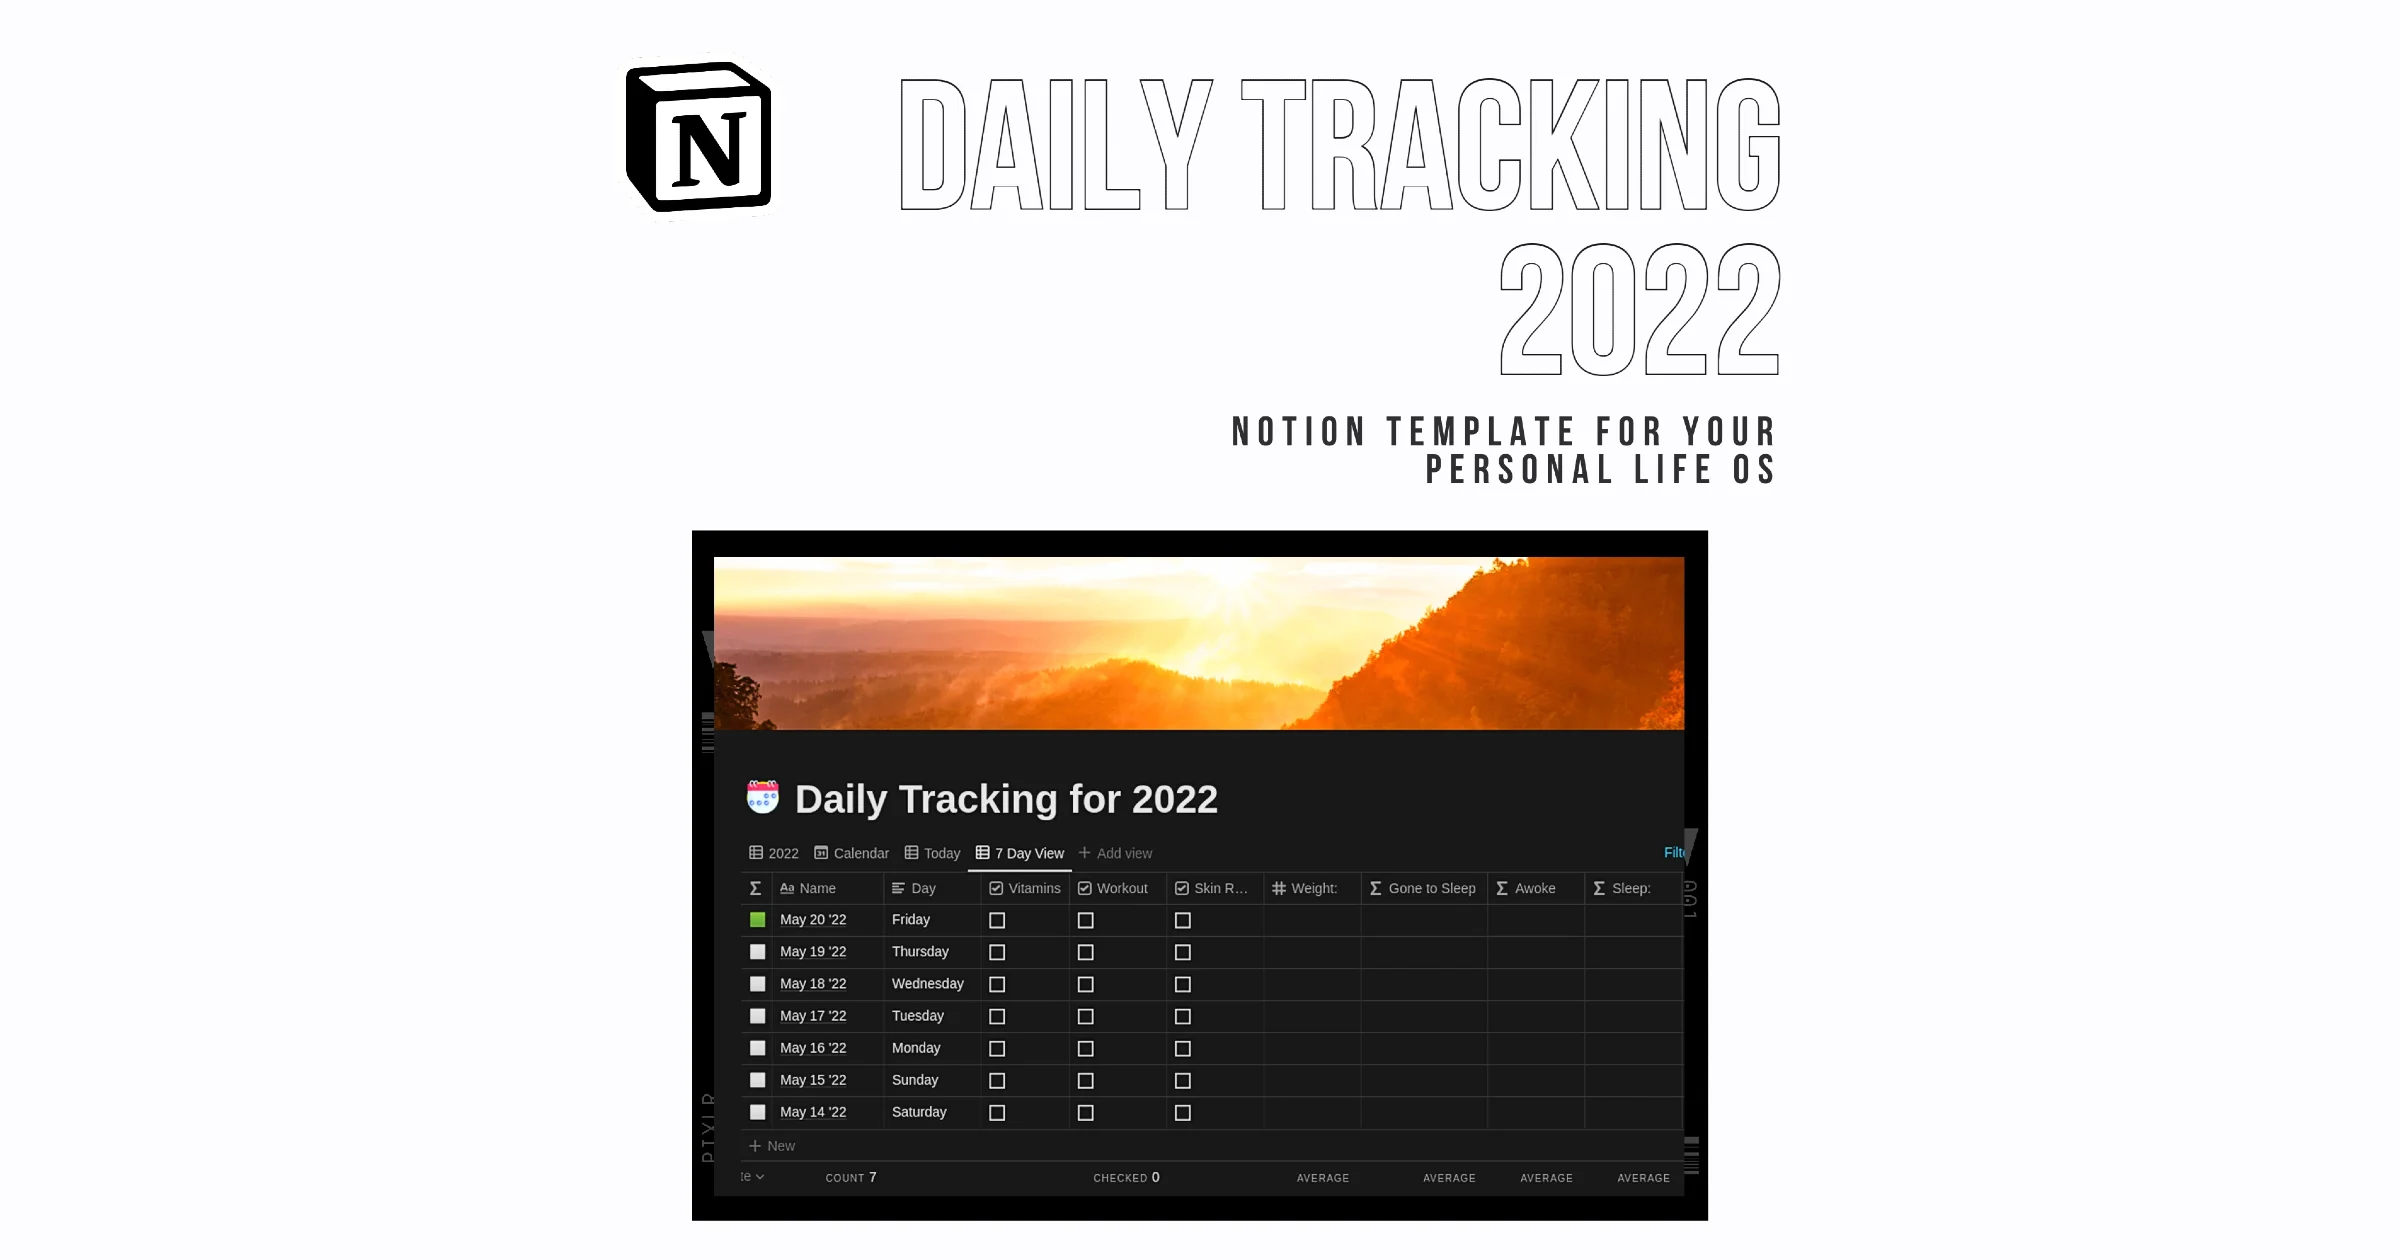 Notion_Templates_that_helped_me_get_my_life_in_order_Daily_Tracking